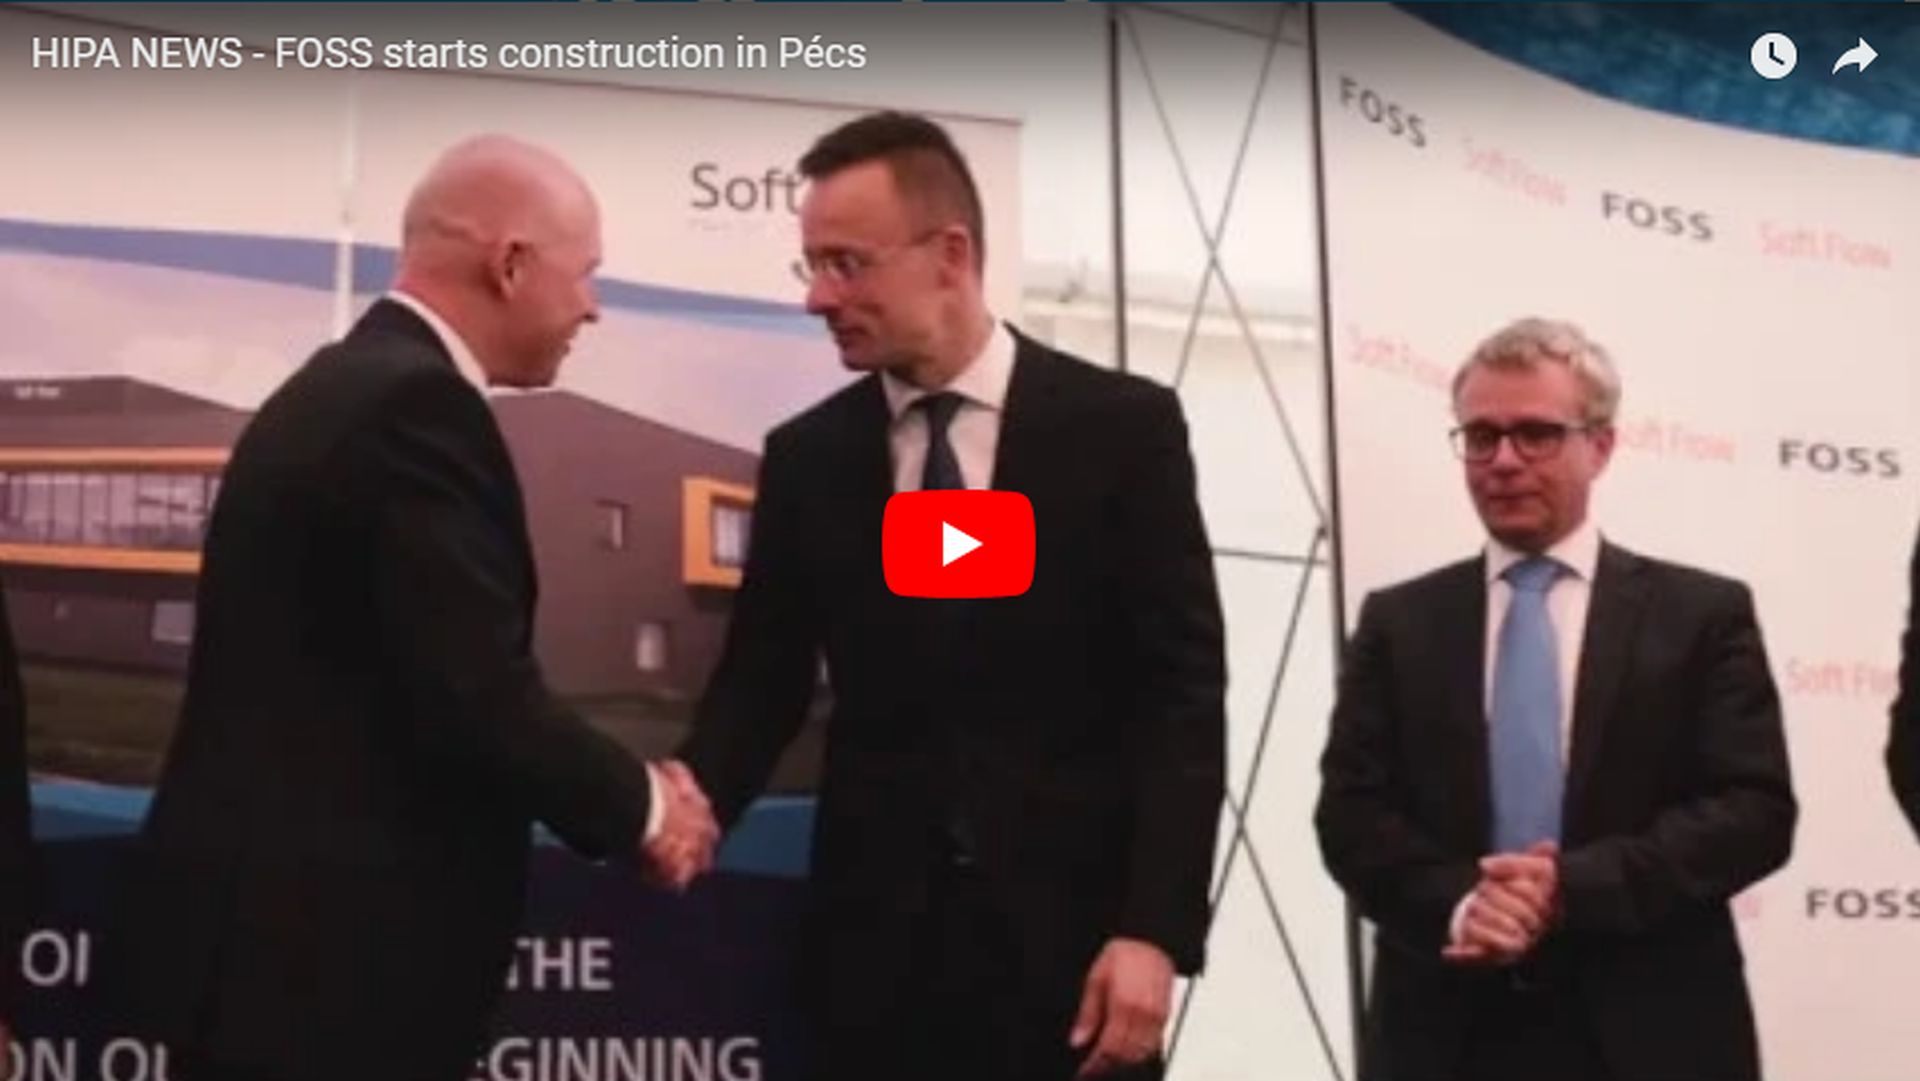 The foundation stone for the new FOSS biotechnology research centre has been laid in Pécs